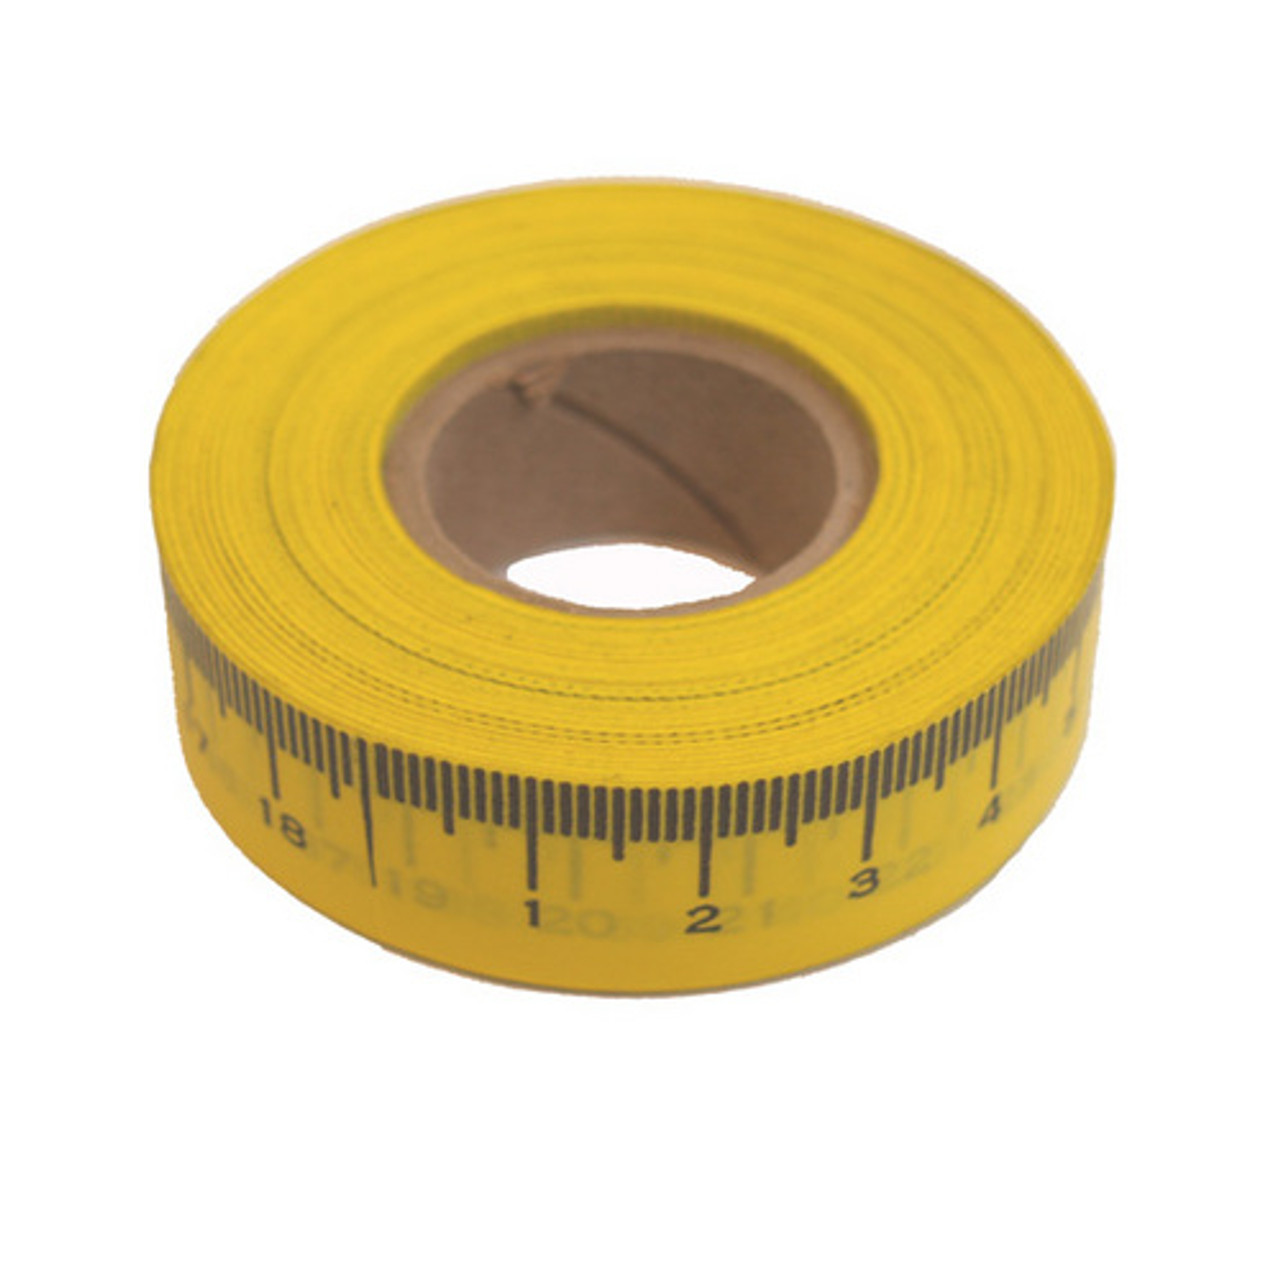 Table Measuring Tape - Metric Left to Right